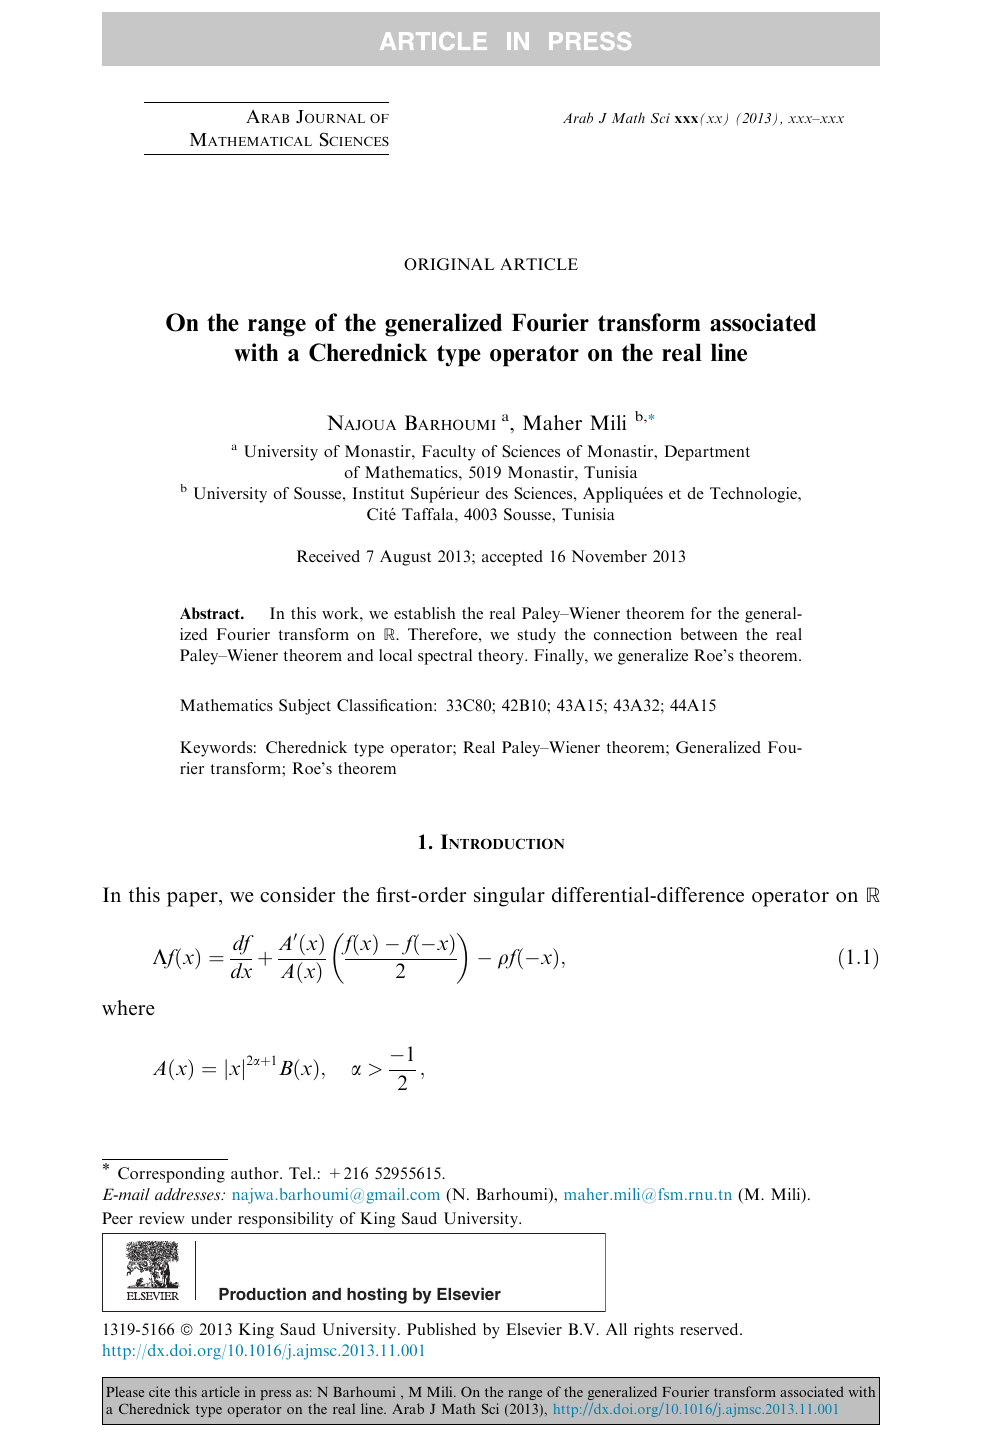 On The Range Of The Generalized Fourier Transform Associated With A Cherednick Type Operator On The Real Line Topic Of Research Paper In Mathematics Download Scholarly Article Pdf And Read For